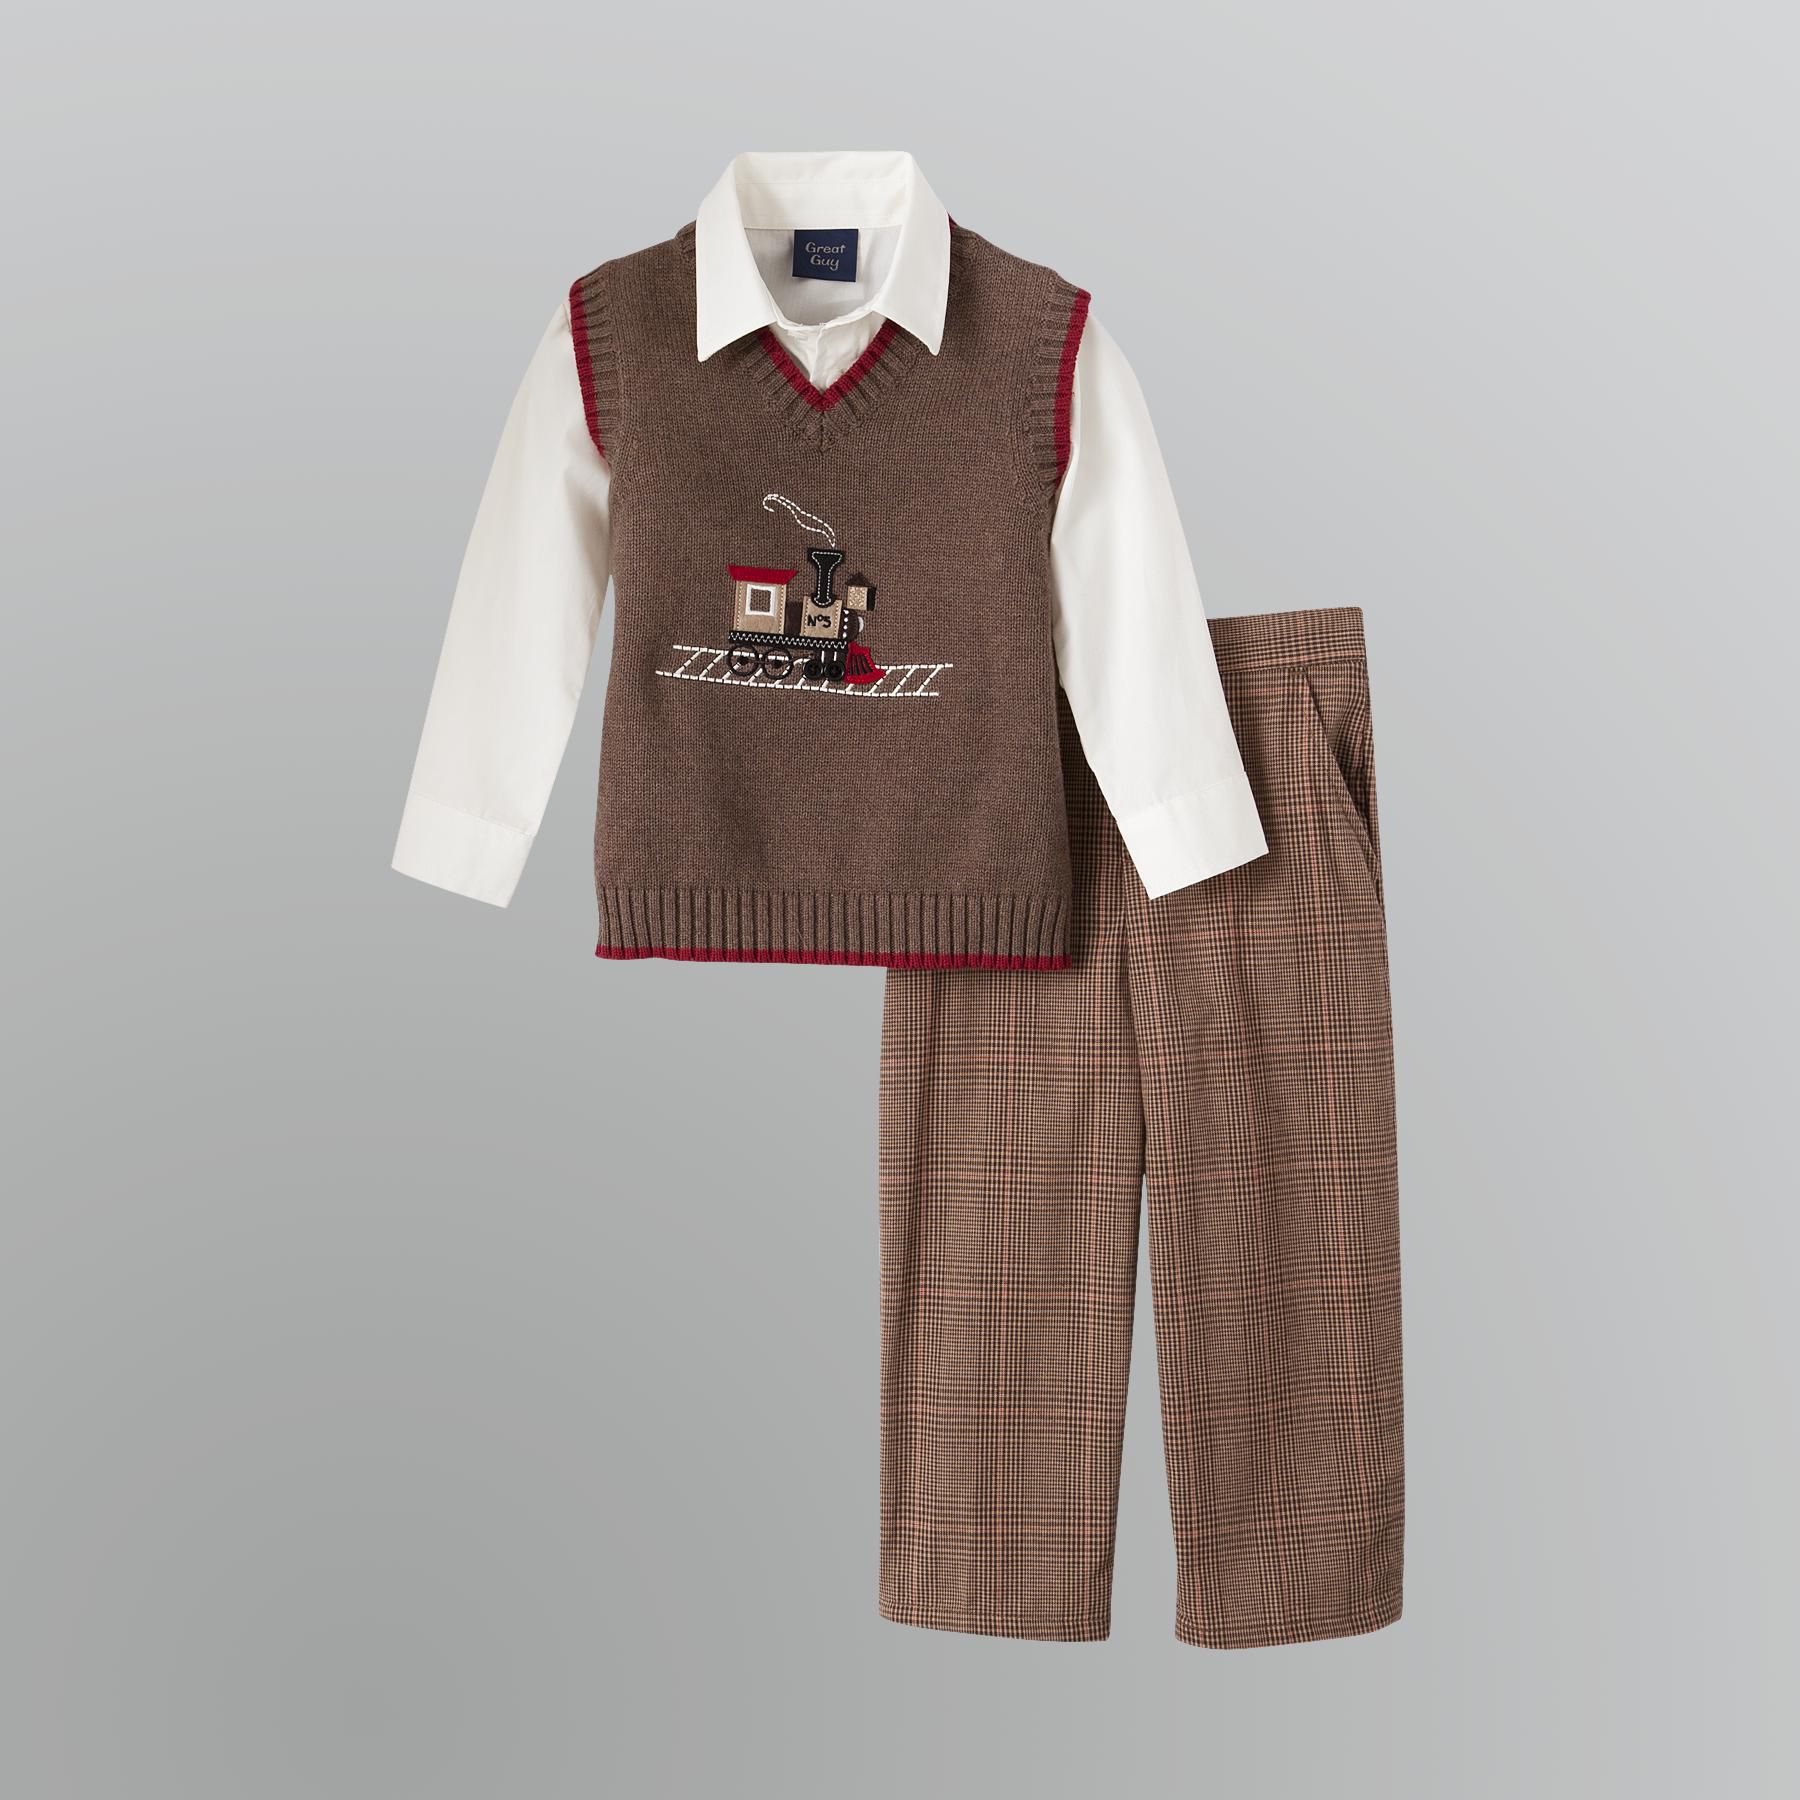 Great Guy Infant and Toddler Boy's Sweater Outfit